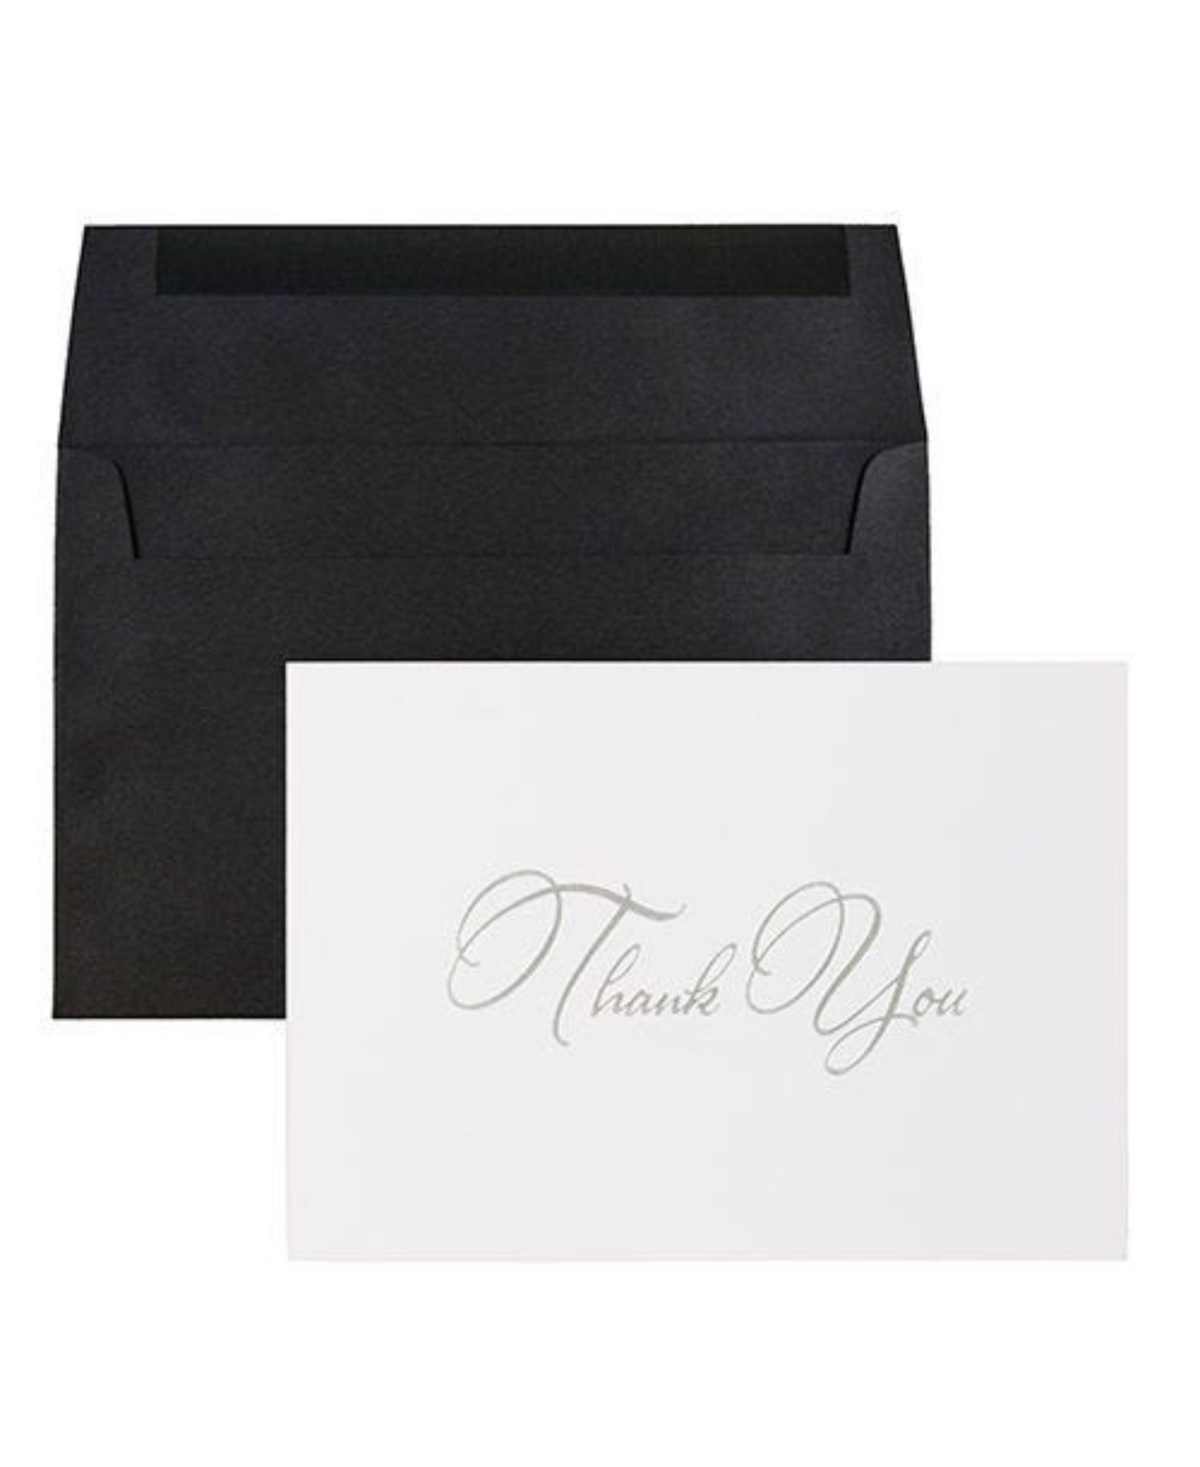 Jam Paper Thank You Card Sets - Silver-Tone Script Cards with Black Linen Envelopes - 25 Cards and Envelopes - Silver Script Cards Black Linen Envelop